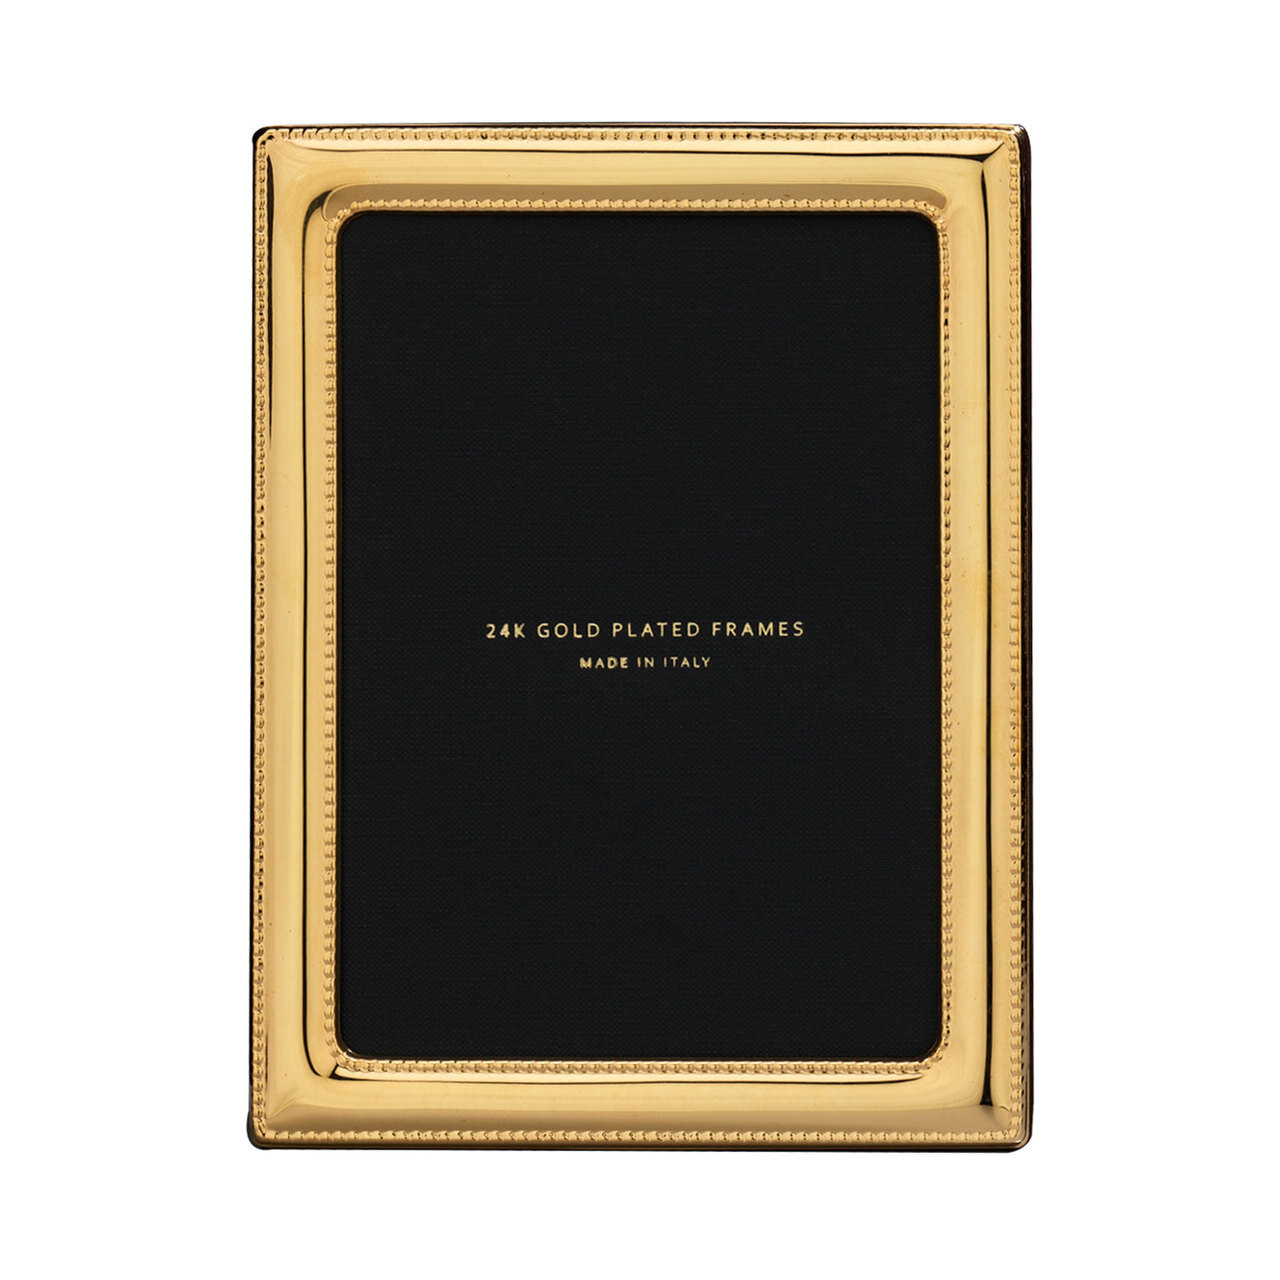 Cunill Pearls 8 x 10 Inch Picture Frame - 24k Gold Plated 0.5 Microns